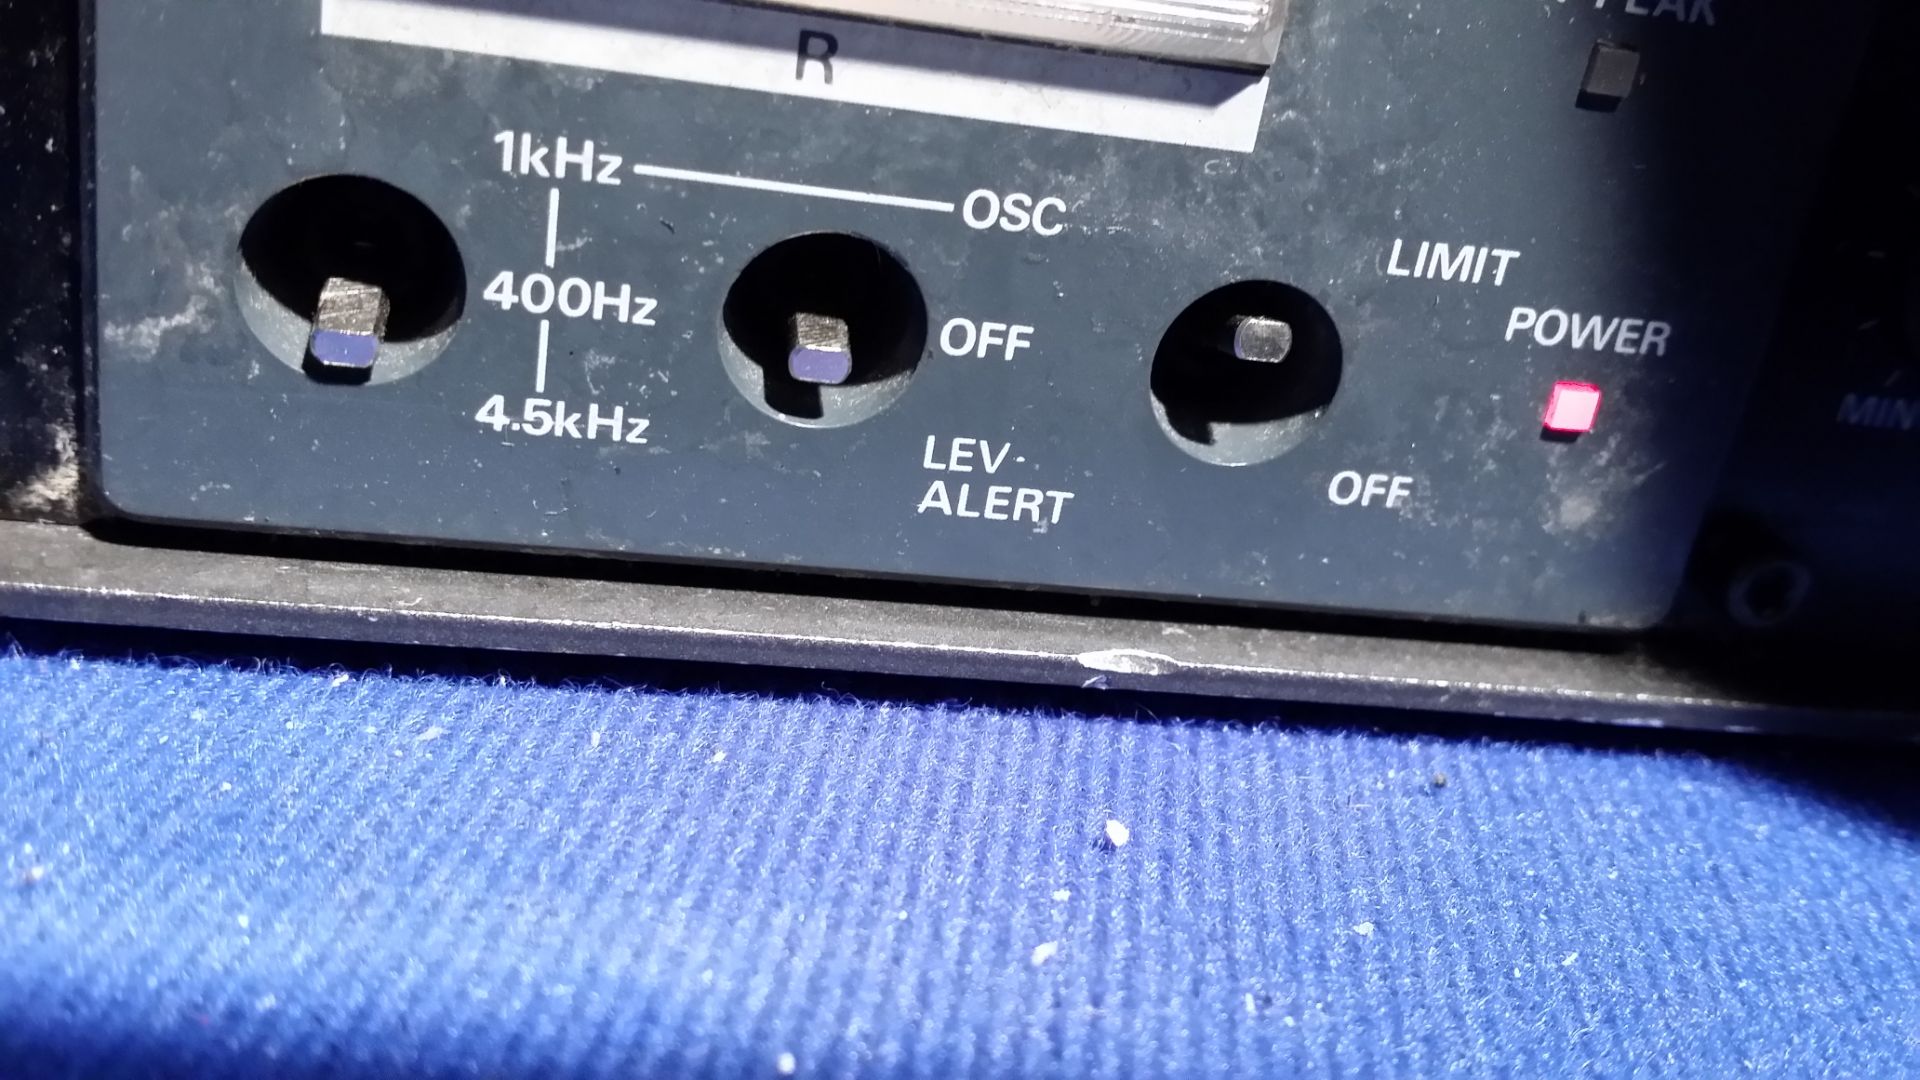 AUDIO-TECHNICA AT4462 Mixer - No Ac Adaptor - Powers On - Image 2 of 3